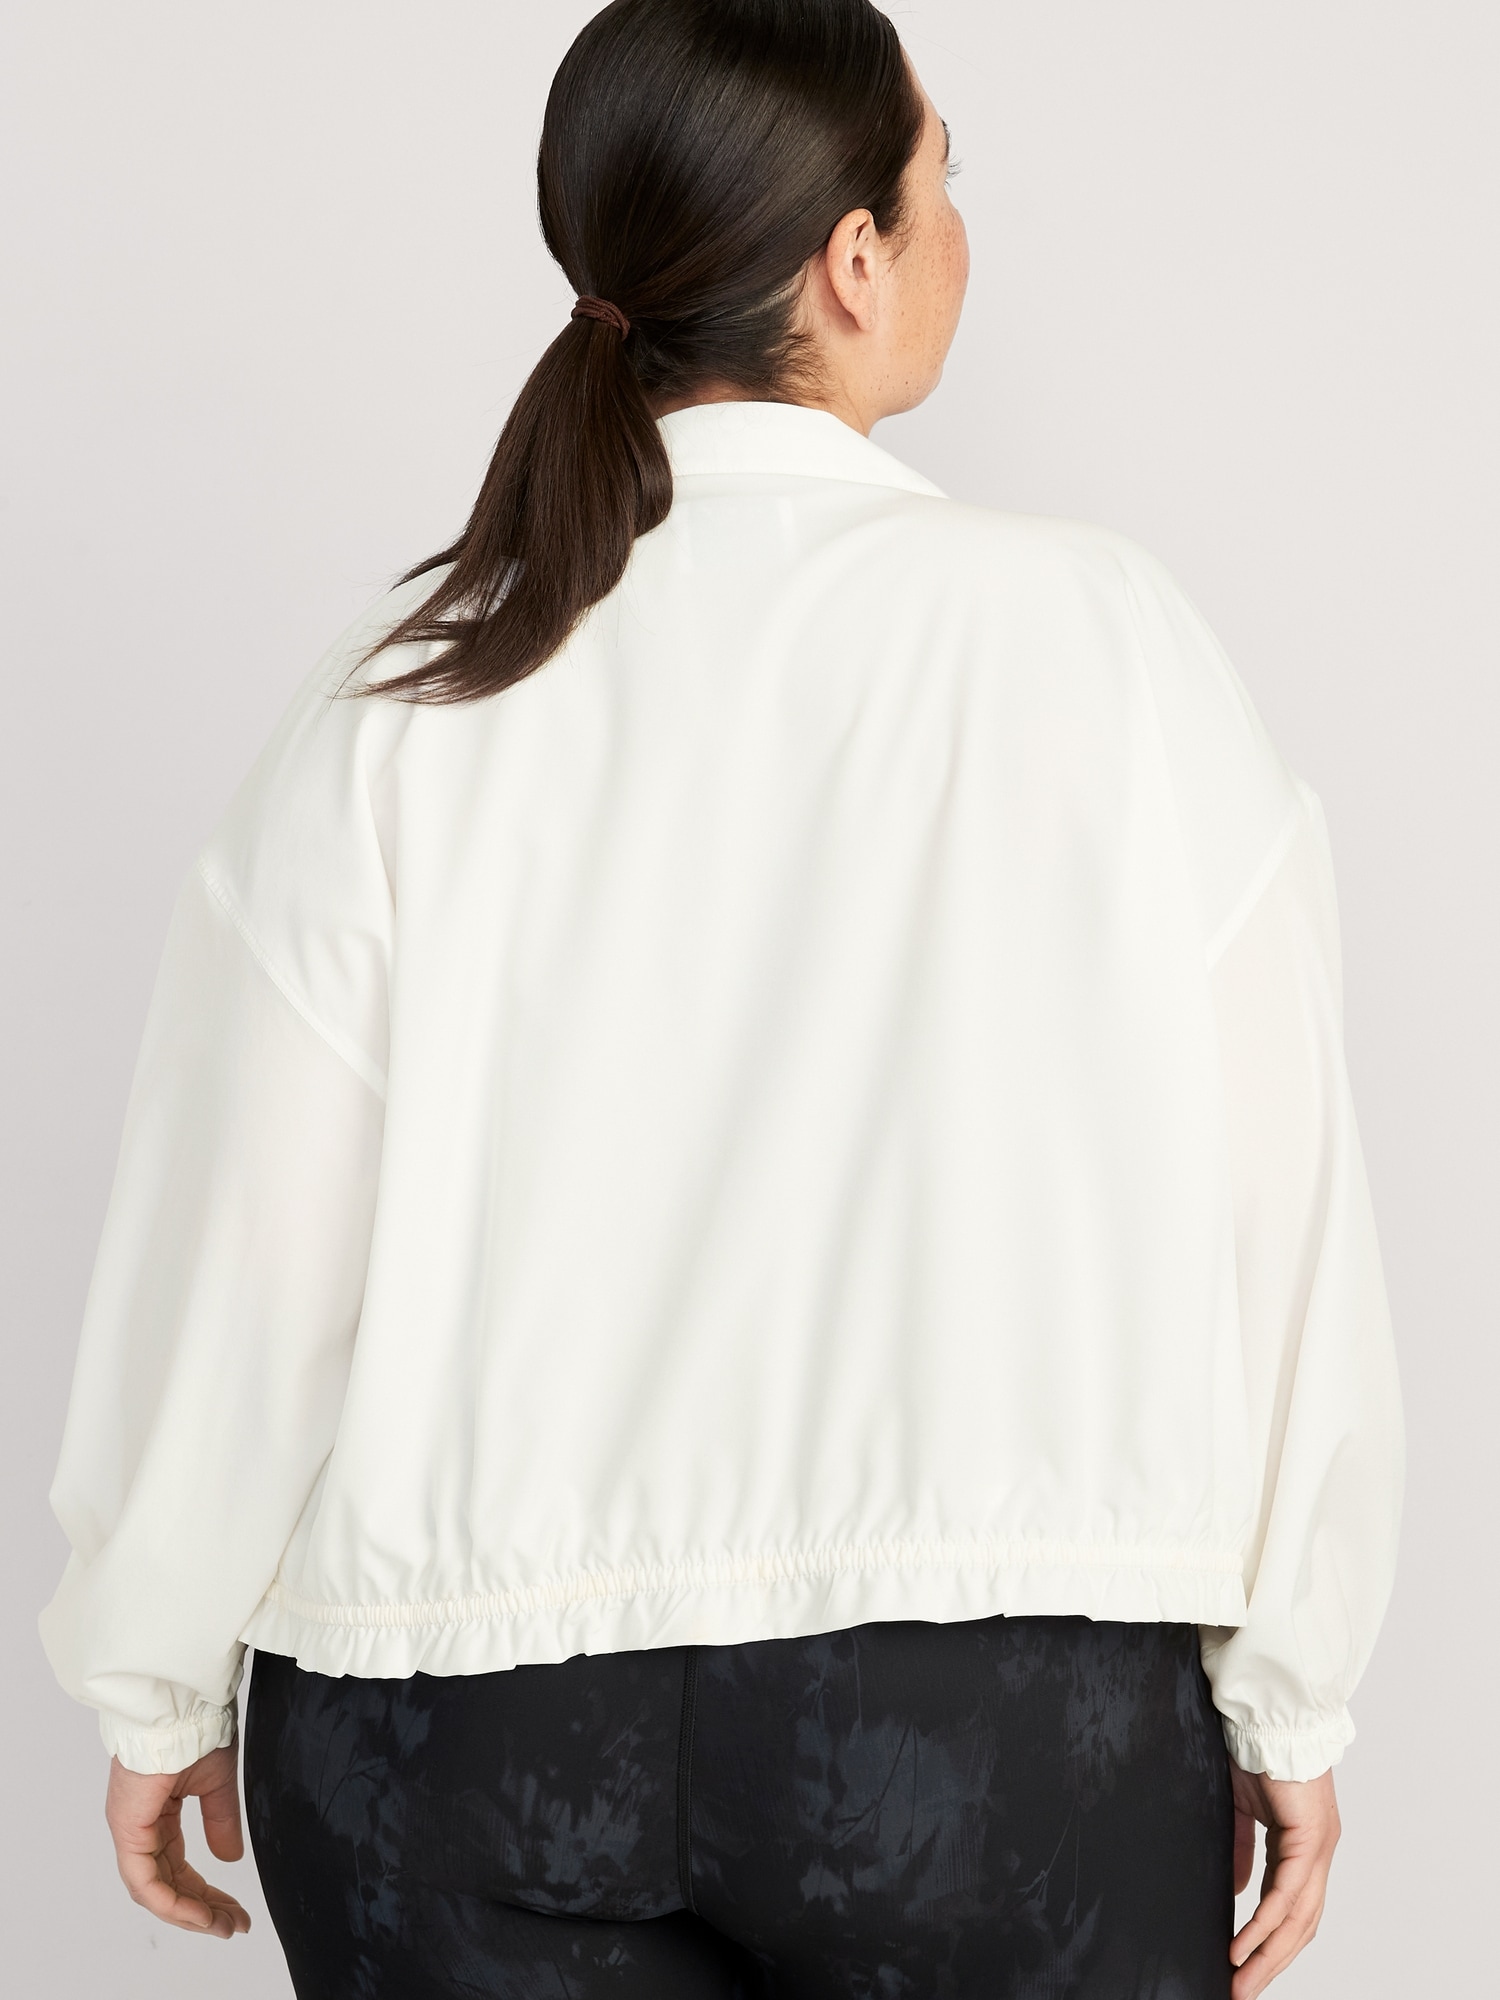 StretchTech Packable Ruffle-Trim Jacket for Women | Old Navy